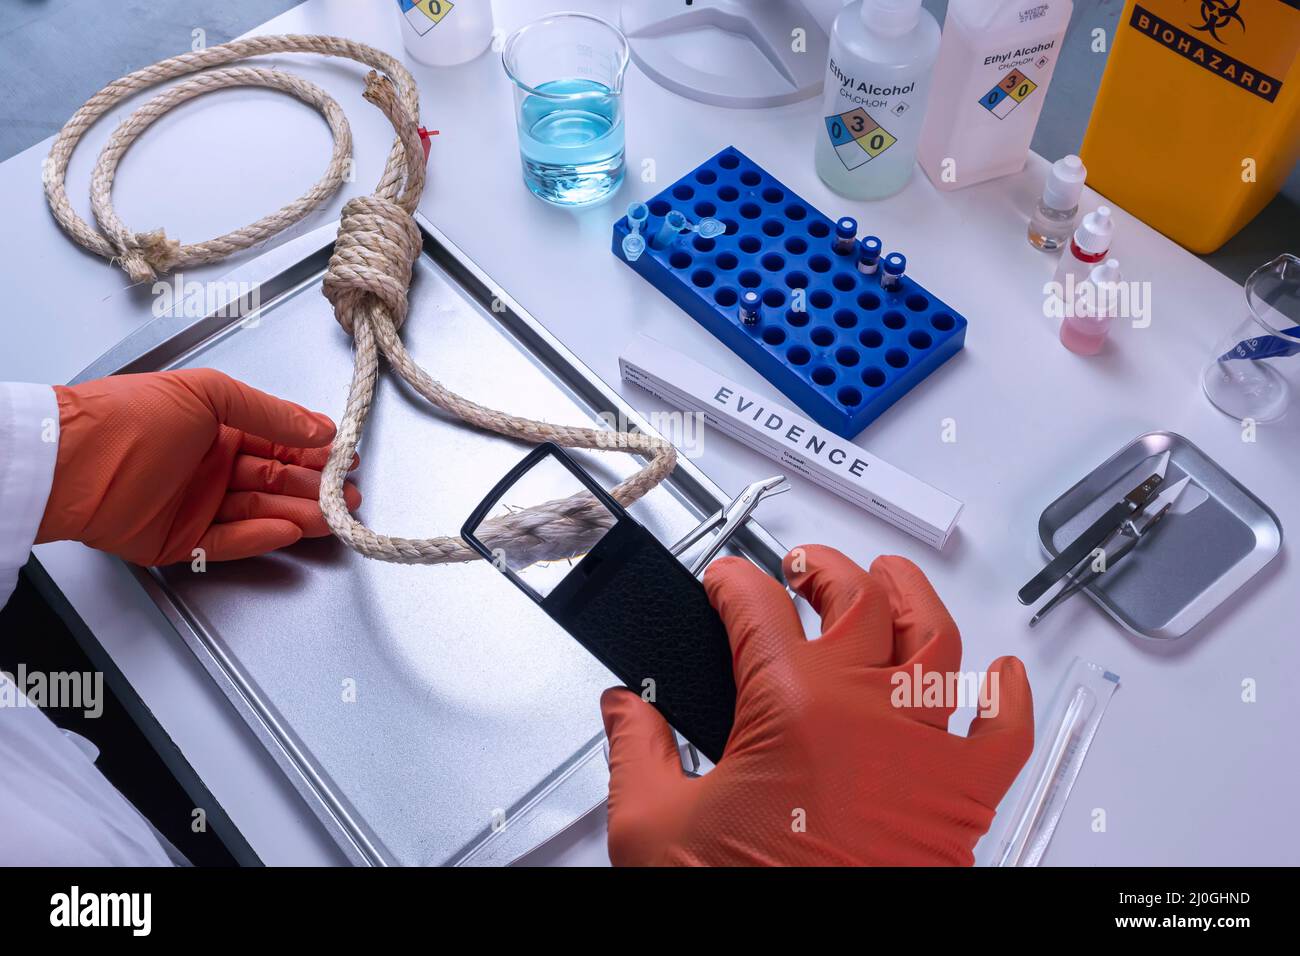 Police scientist analyses rope involved in hanging murder in crime lab, conceptual image Stock Photo